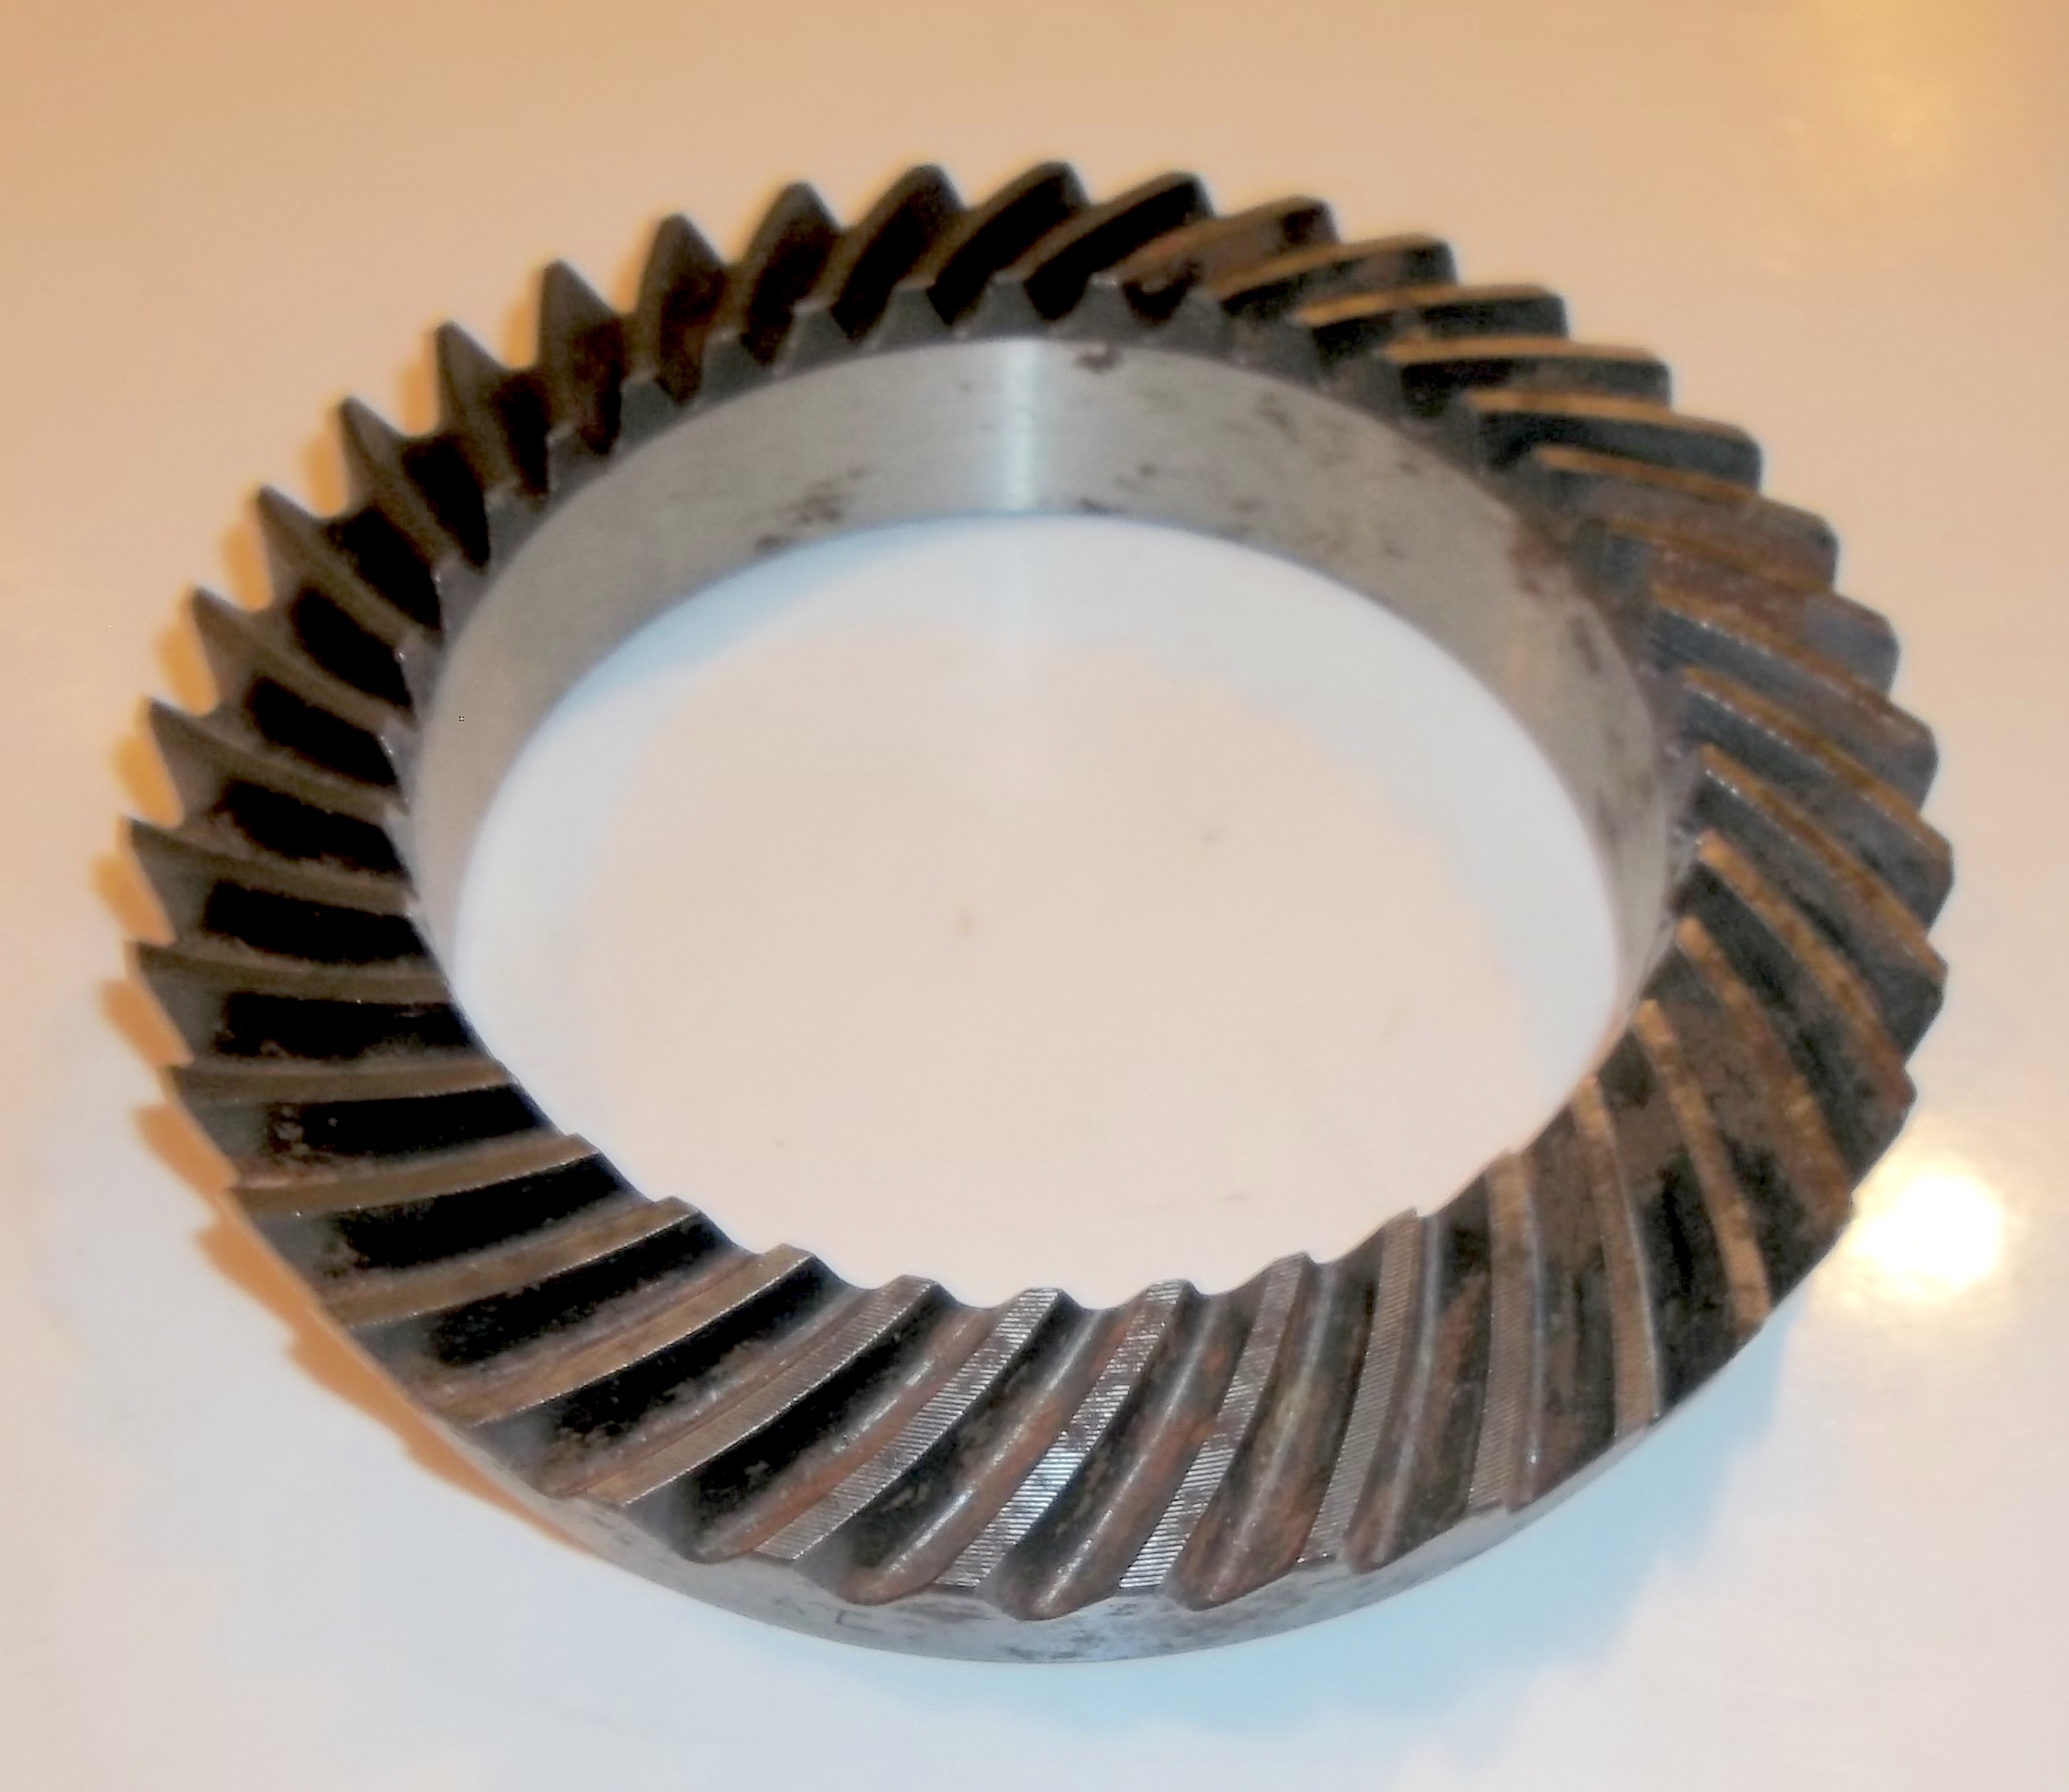 Front driven bevel gear